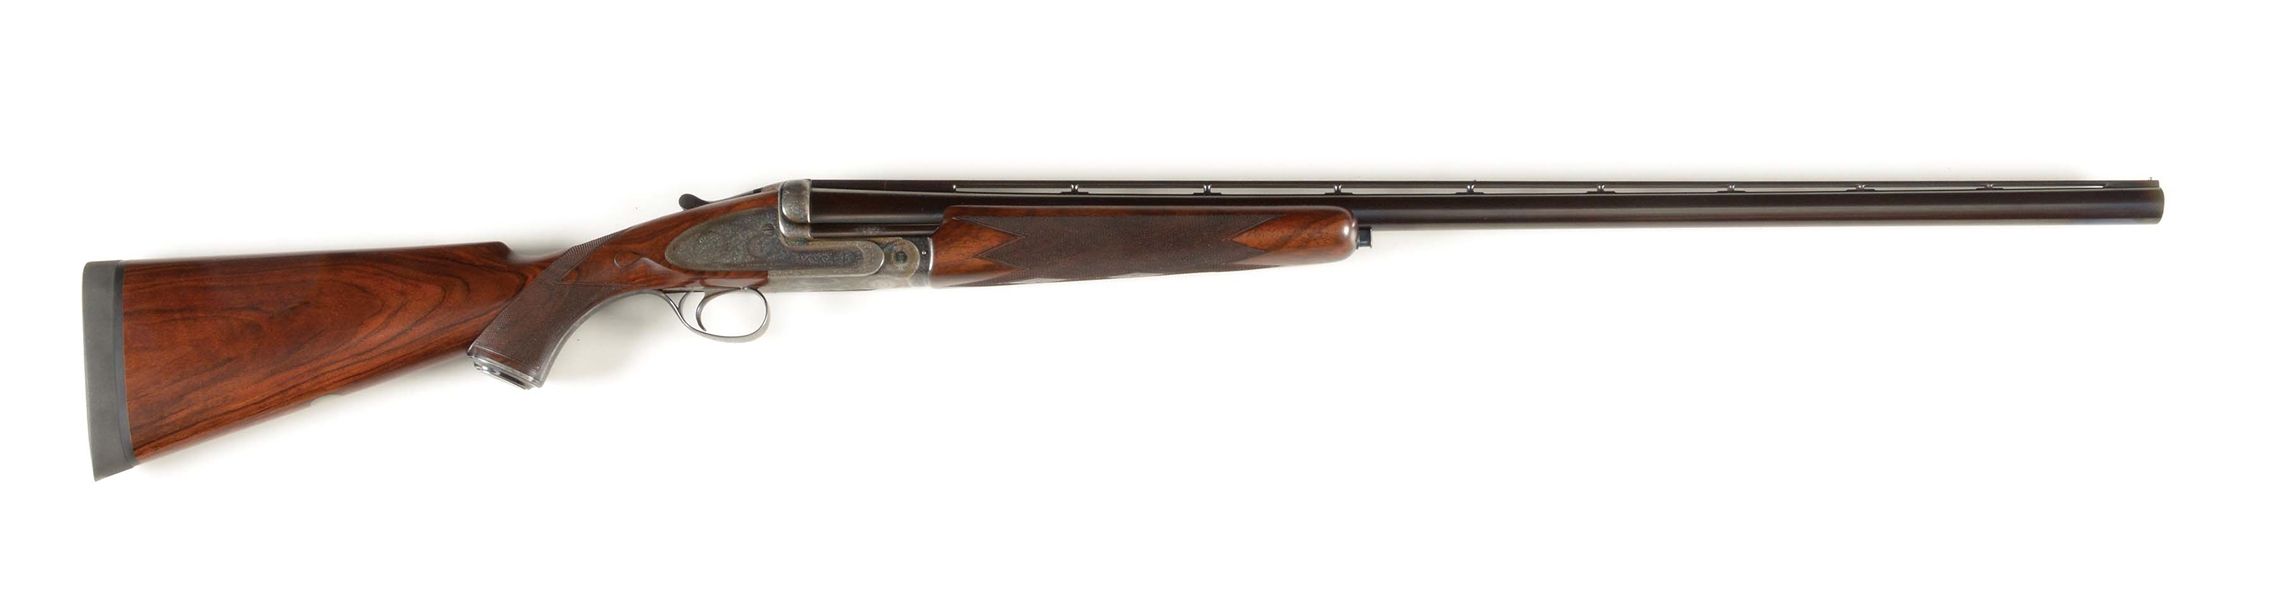 (C) ONE OF ONLY 59 PURDEY SINGLE BARREL TRAP SHOTGUNS, WHICH IS IN HIGH ORIGINAL CONDITION.